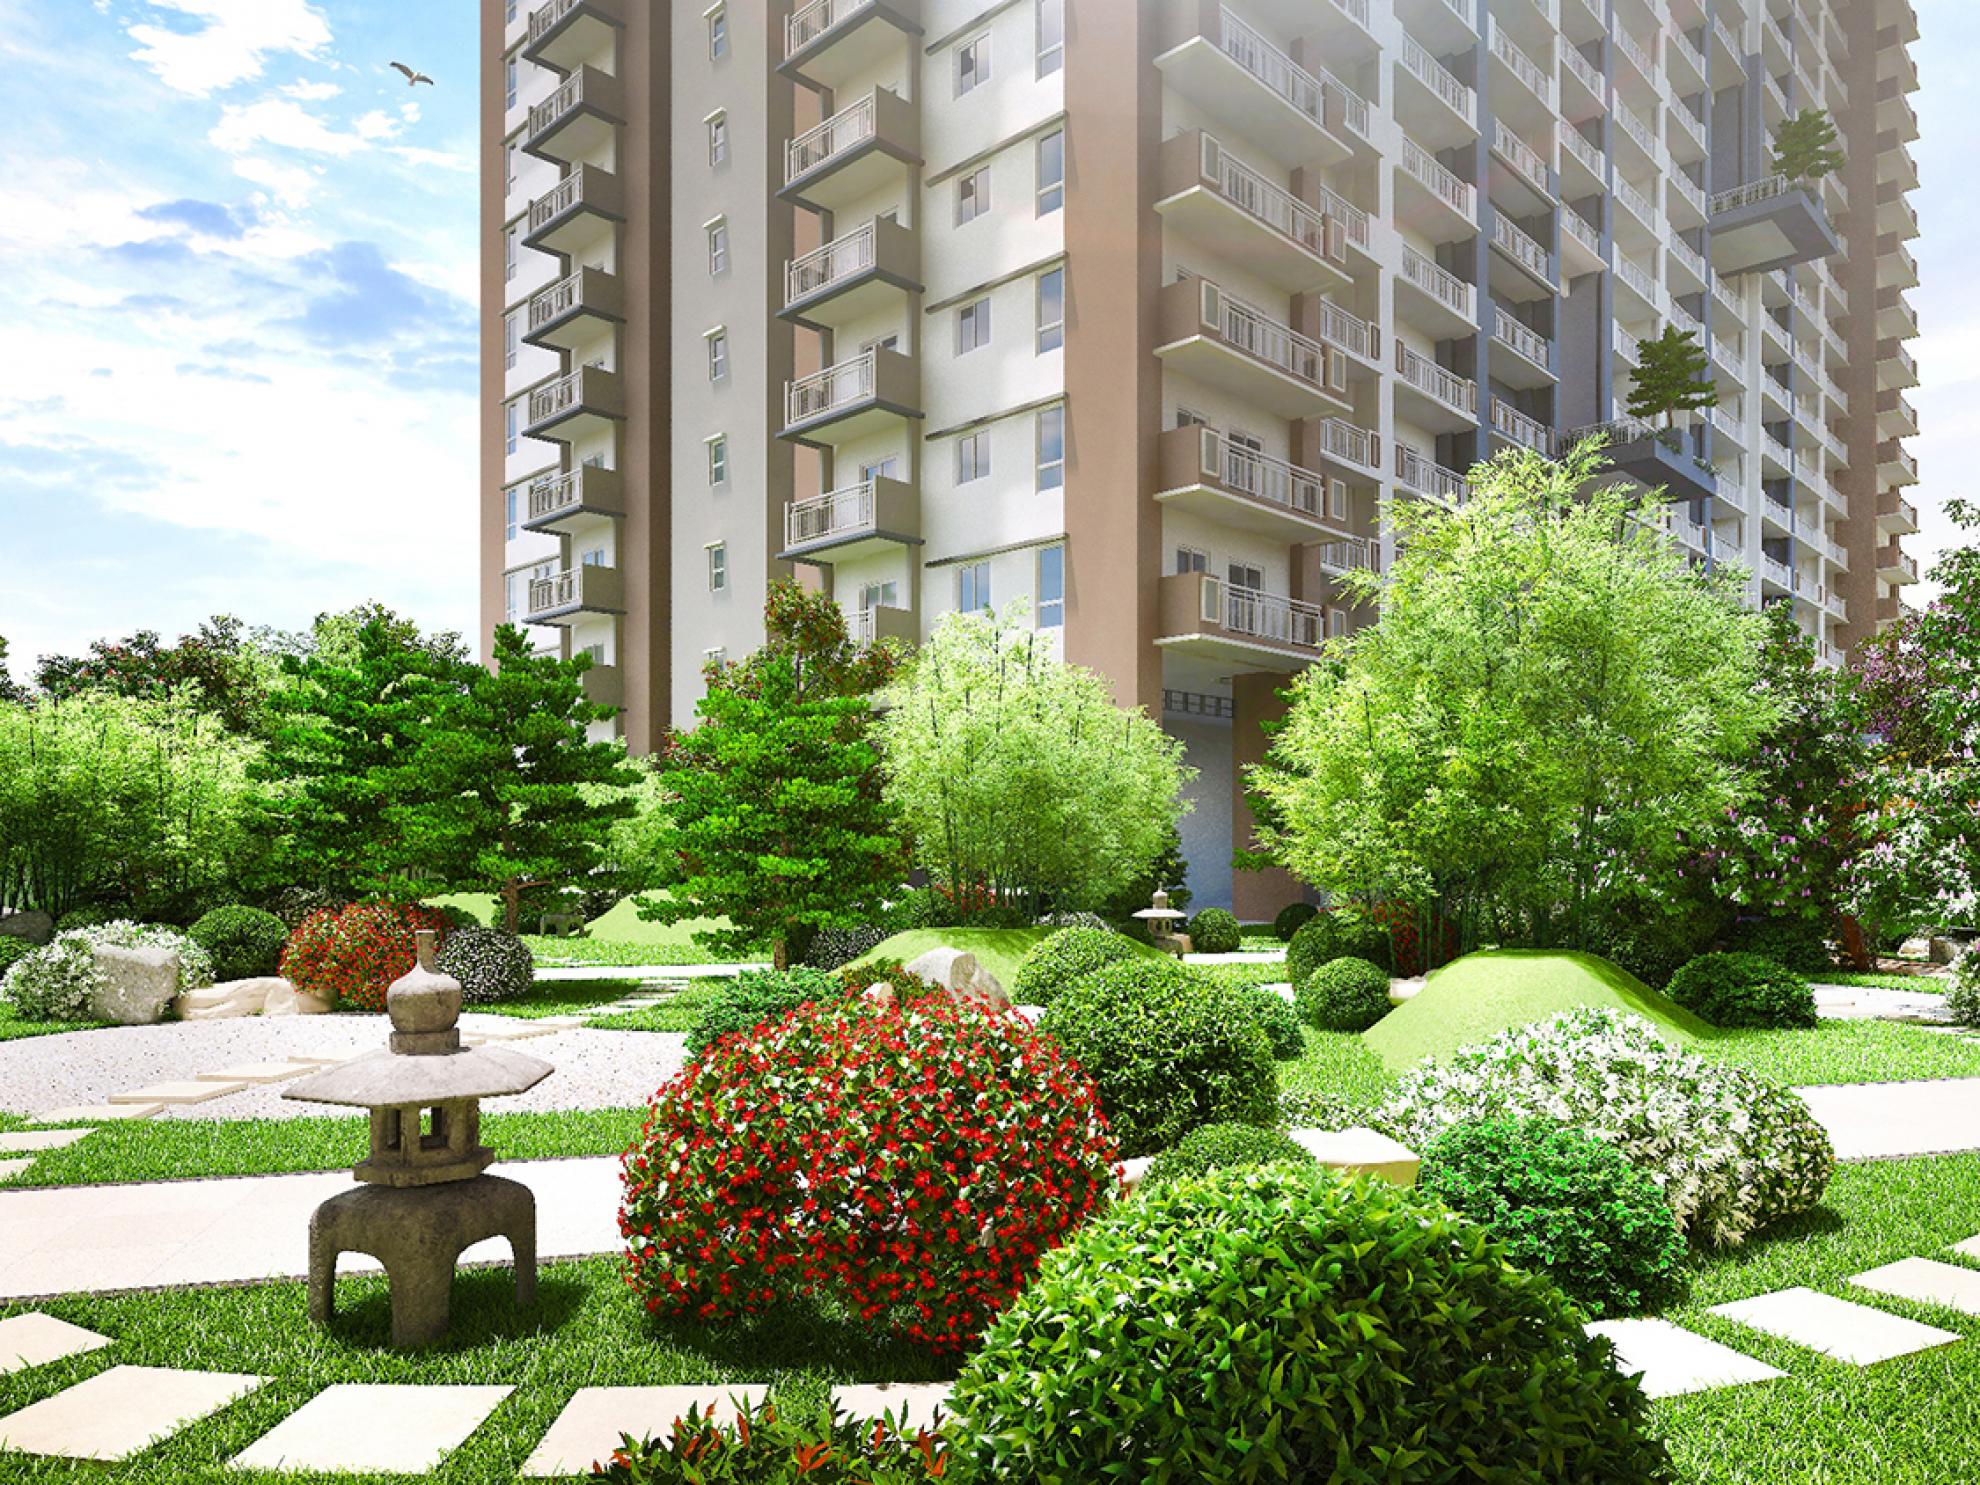 DMCI Homes aims to showcase its landscaping expertise in Kai Garden Residences by utilizing local flower-bearing shrubs and trees like the Palawan Cherry and the radiant Banaba tree to create an impression of a typical Japanese garden.